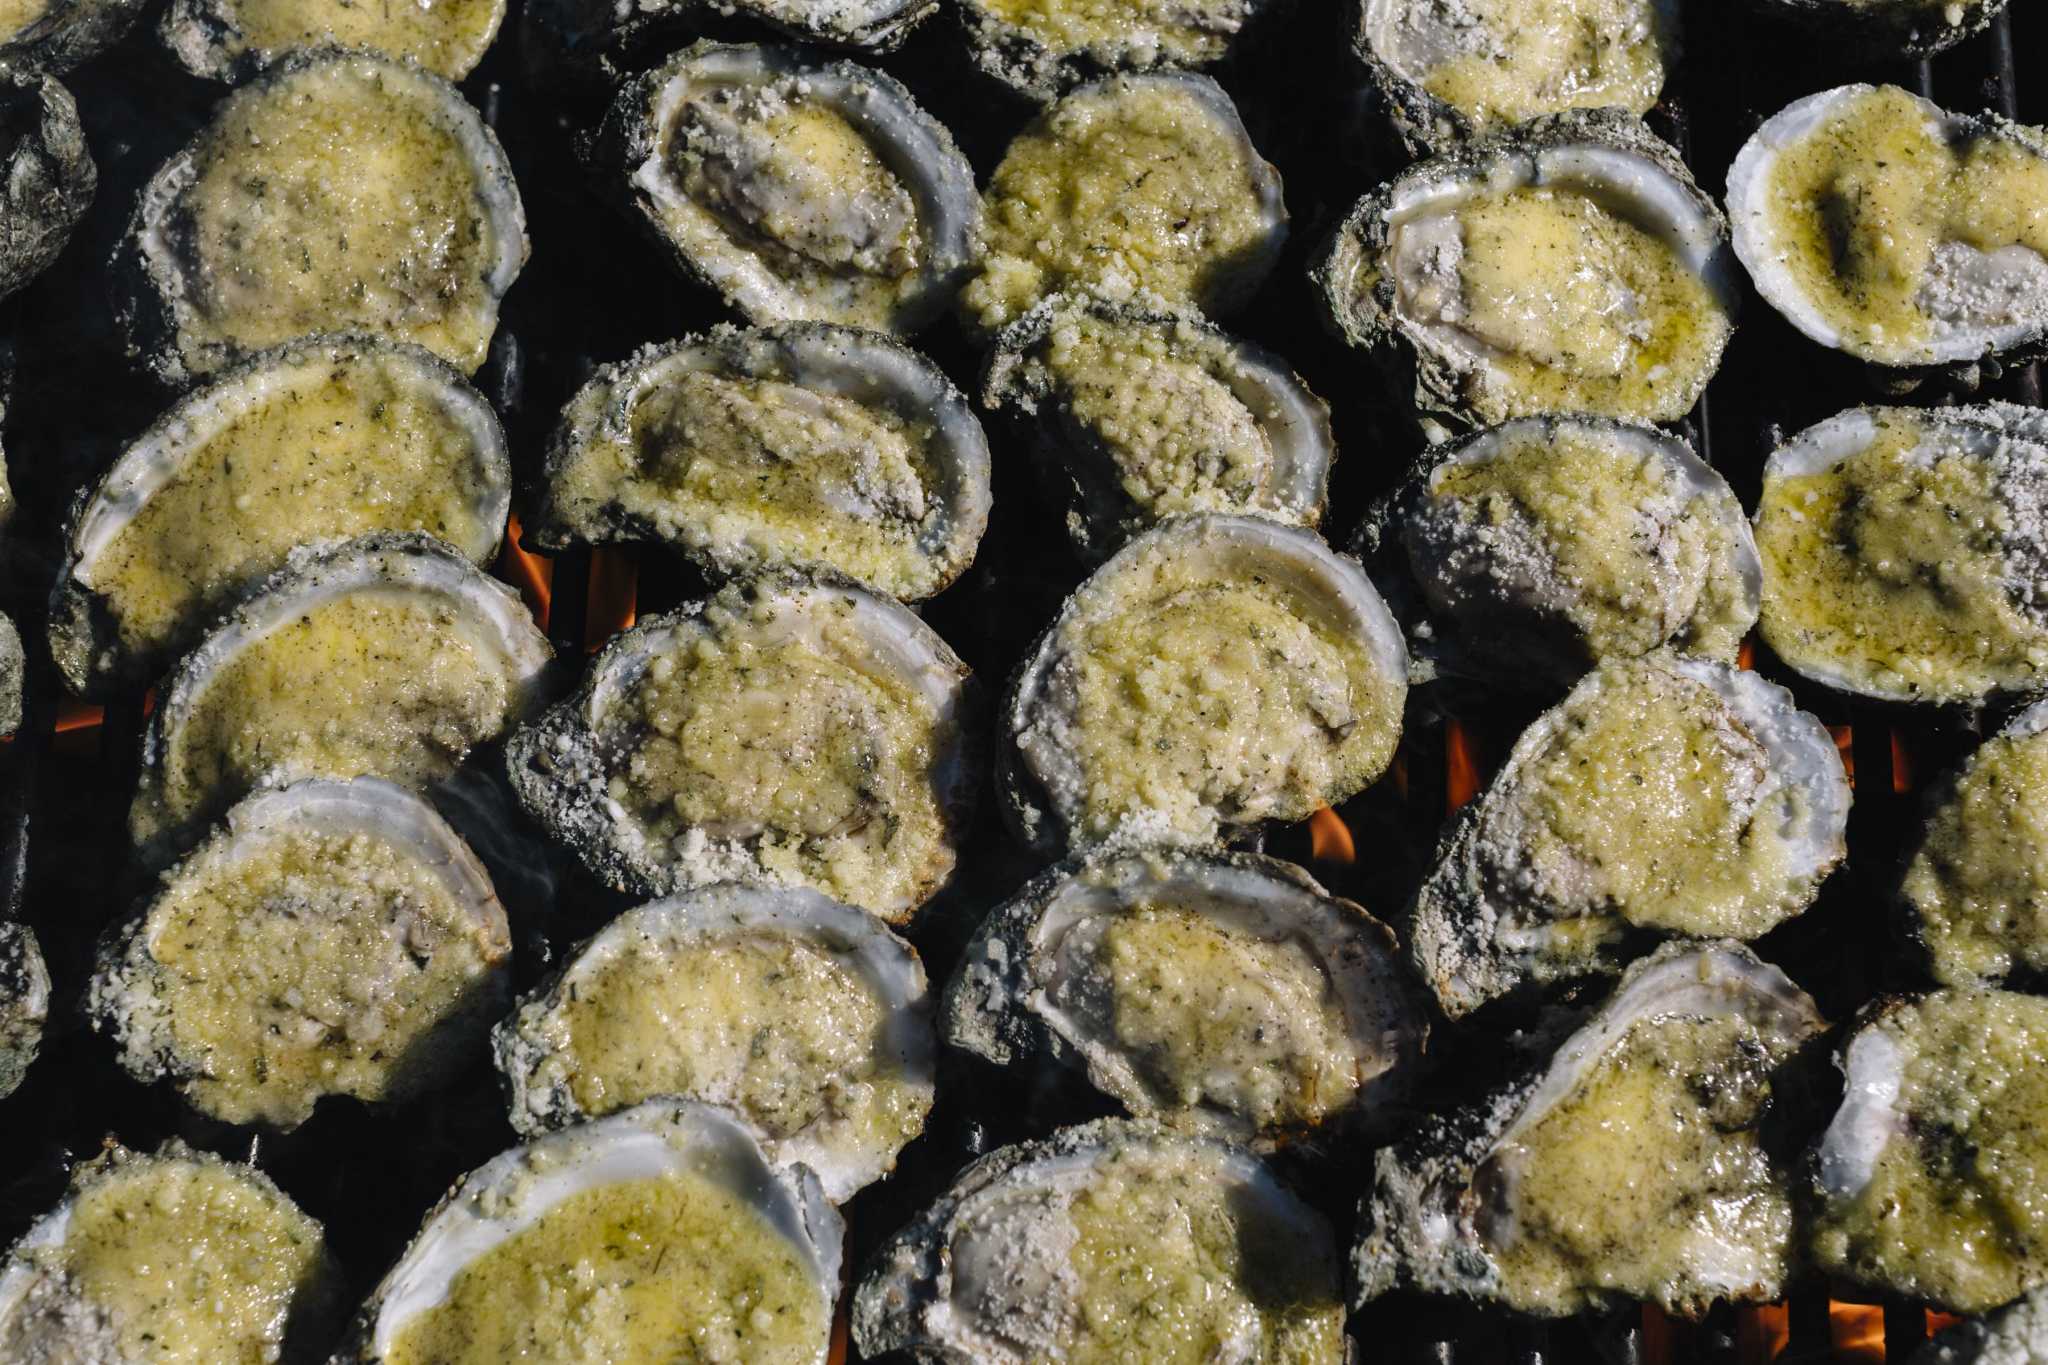 Chargrilled Shucked Oysters Recipe